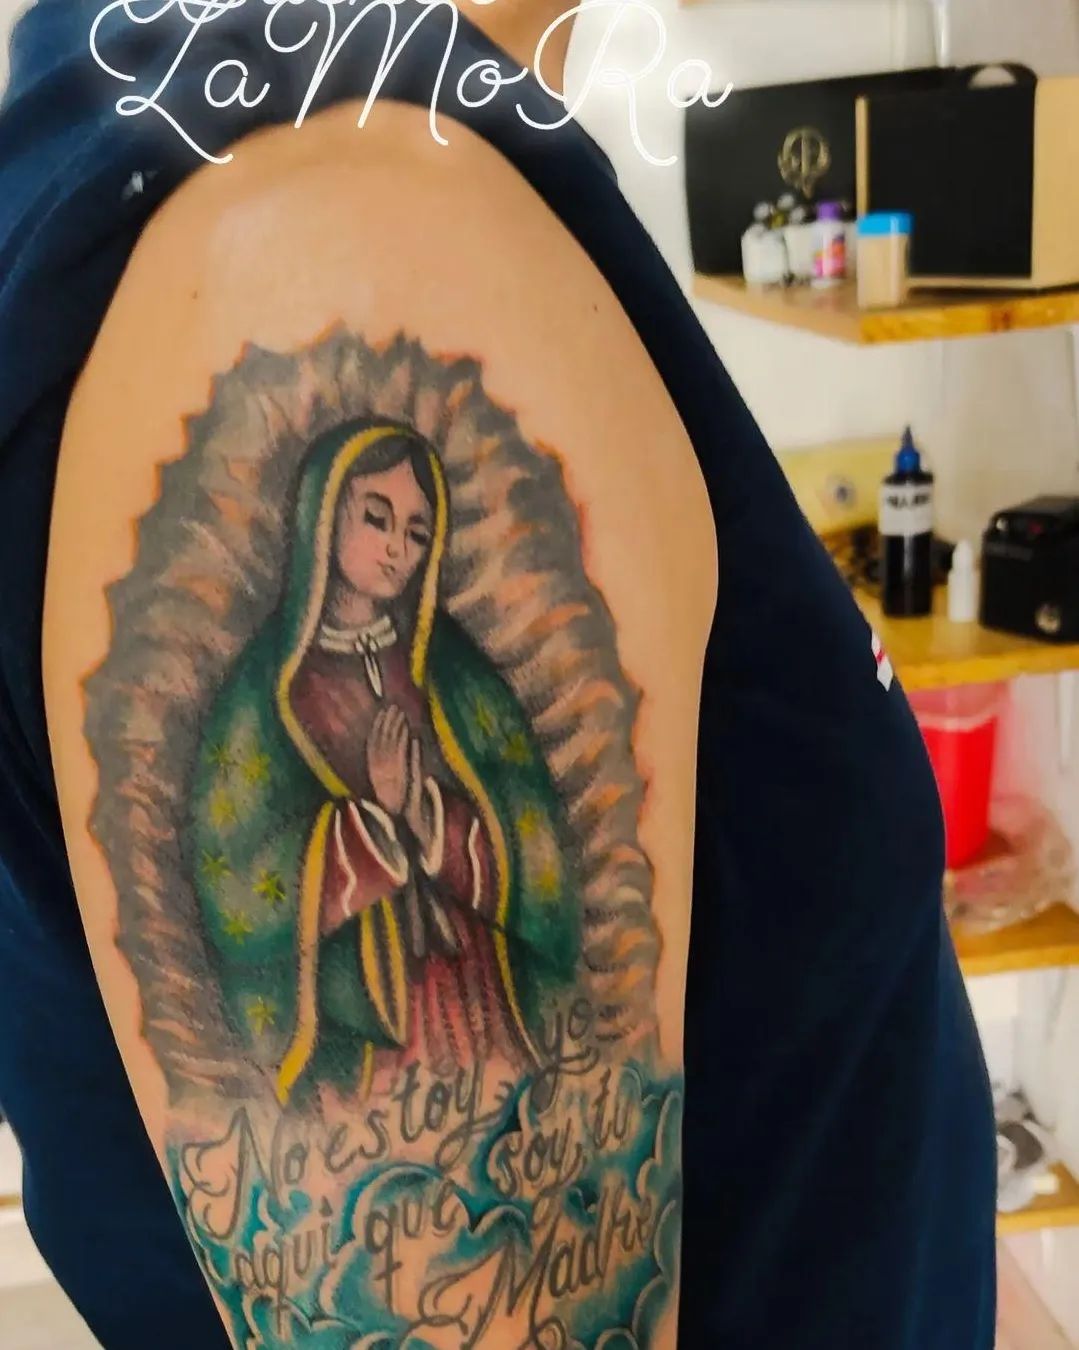 Cosmo Tattoos on Twitter Our lady of Guadalupe tattoo by German V  httptcoJRXXTkcfoT httptcoBvATURMsP9  Twitter